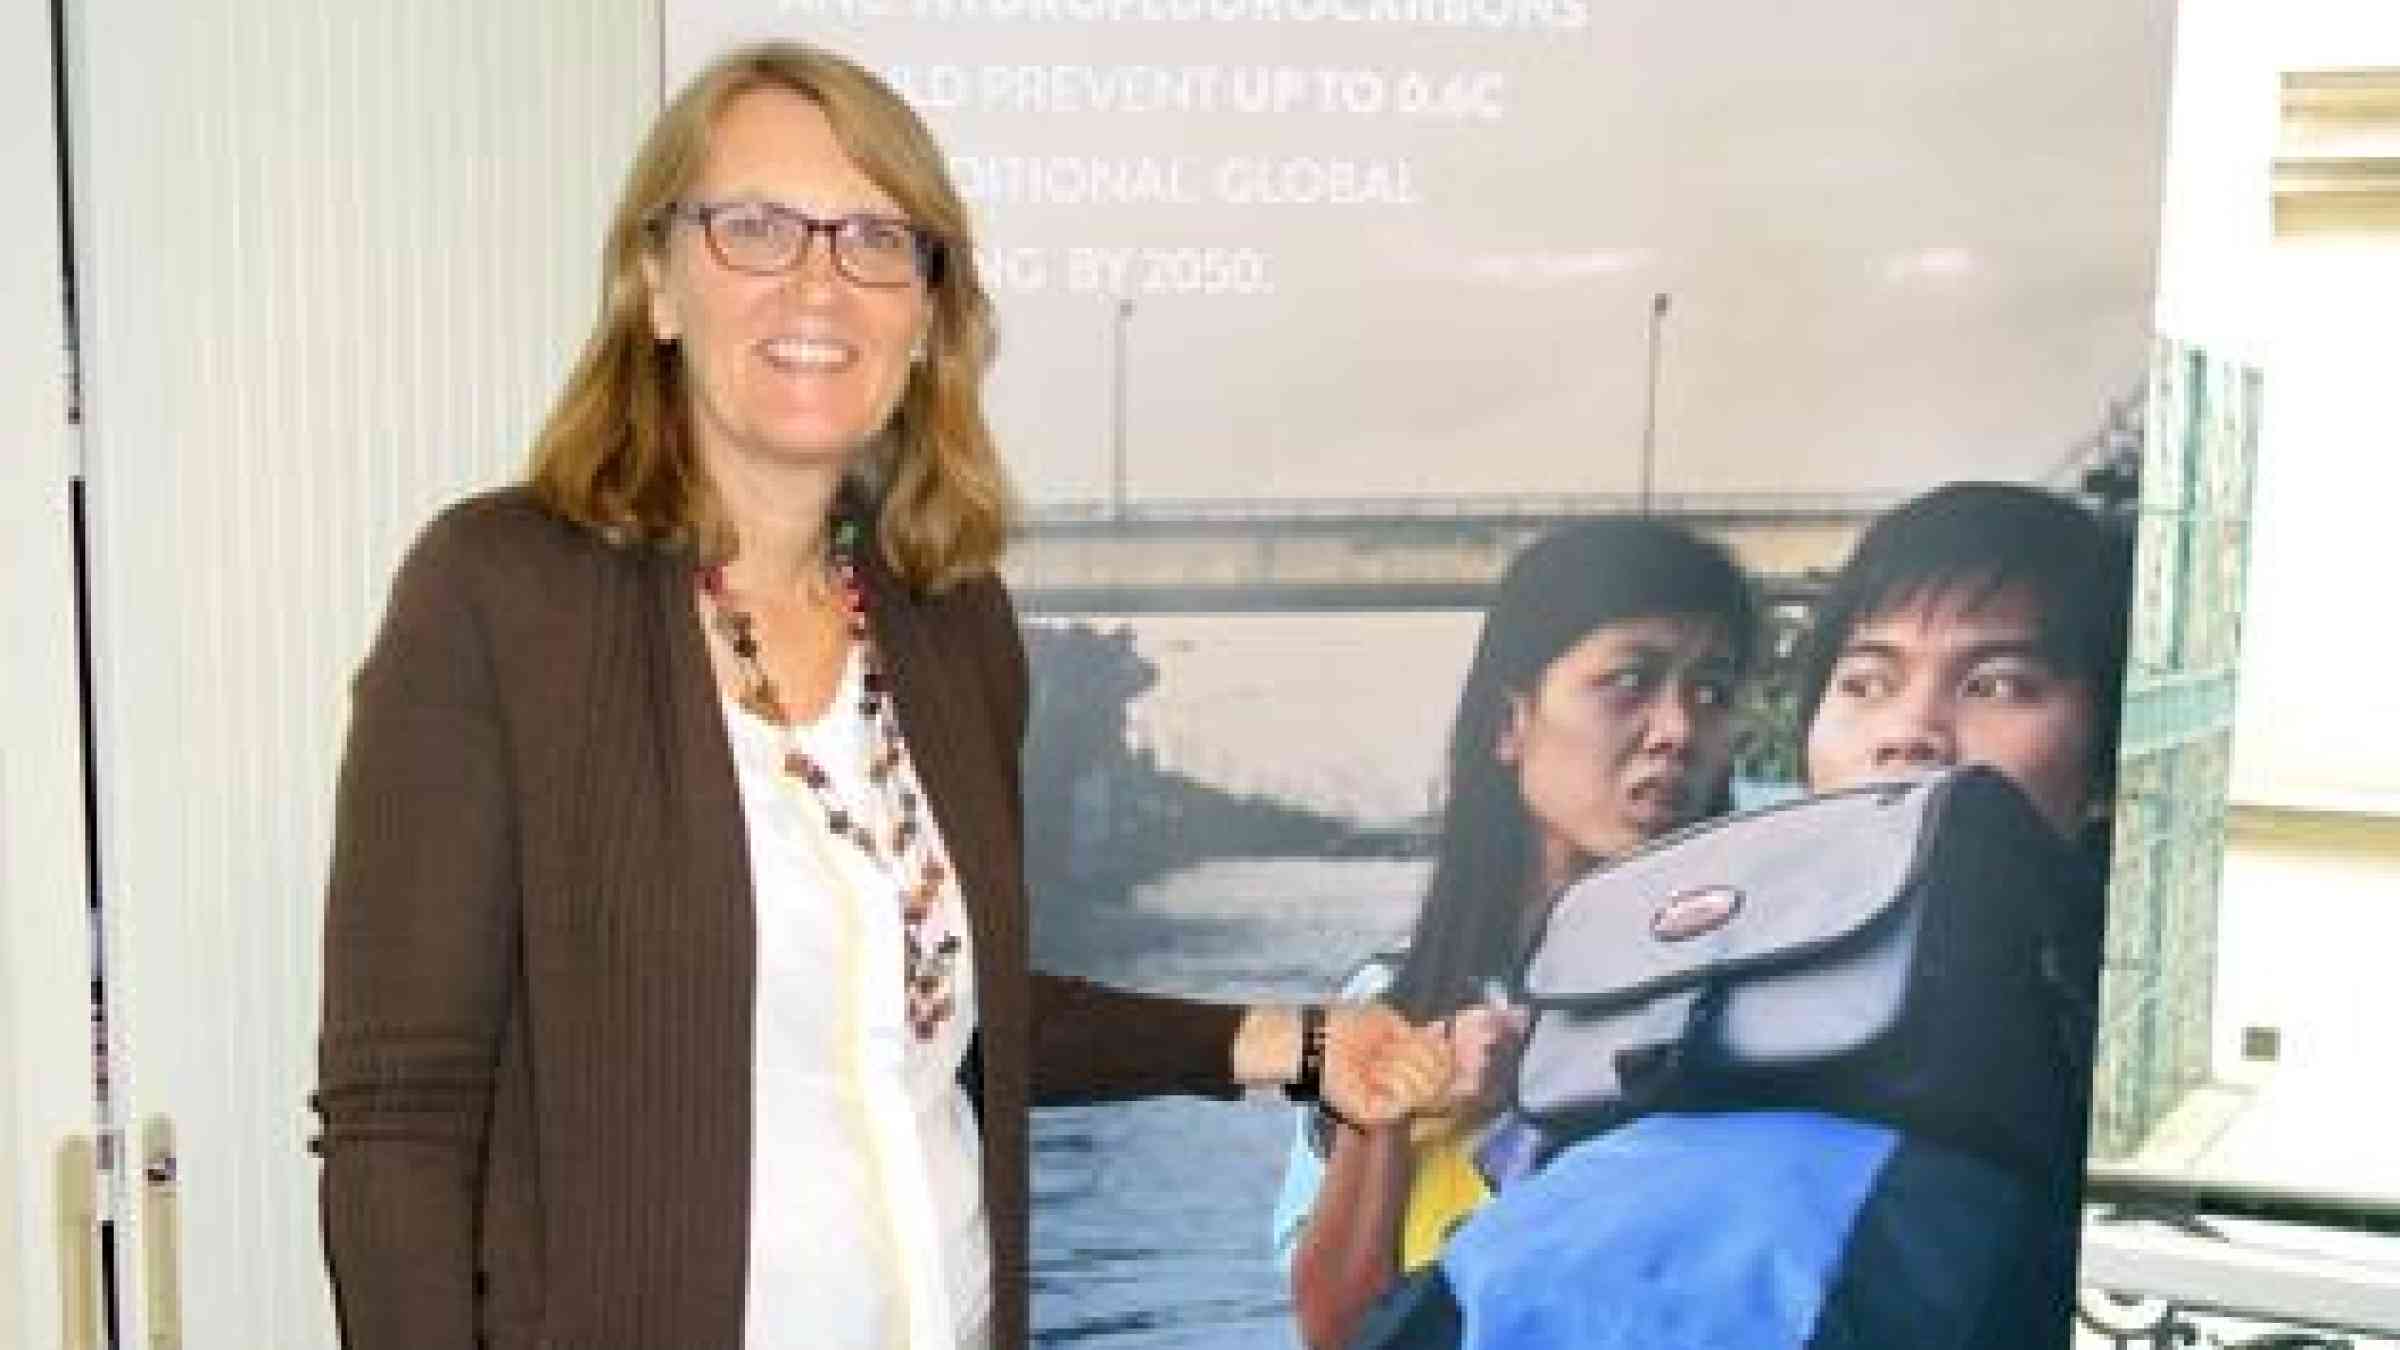 Helena Molin Valdes who  leads the secretariat of the Climate and Clean Air Coalition. (Photo: UNISDR)